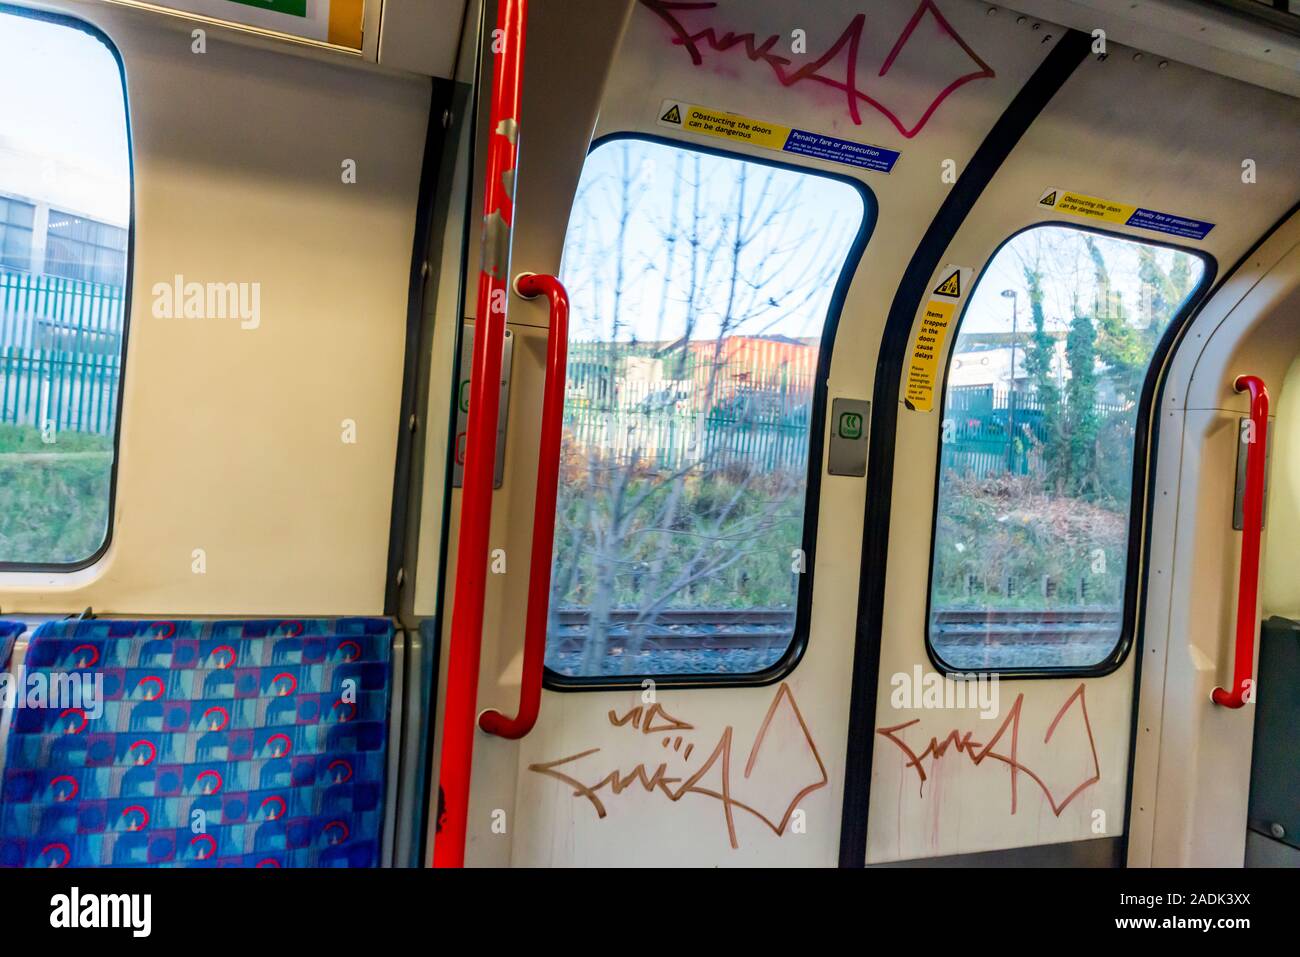 Graffiti inside a London Underground tube train carriage. Subway railway train with graffiti tag, tags. Handstyle tagging on doors of carriage Stock Photo